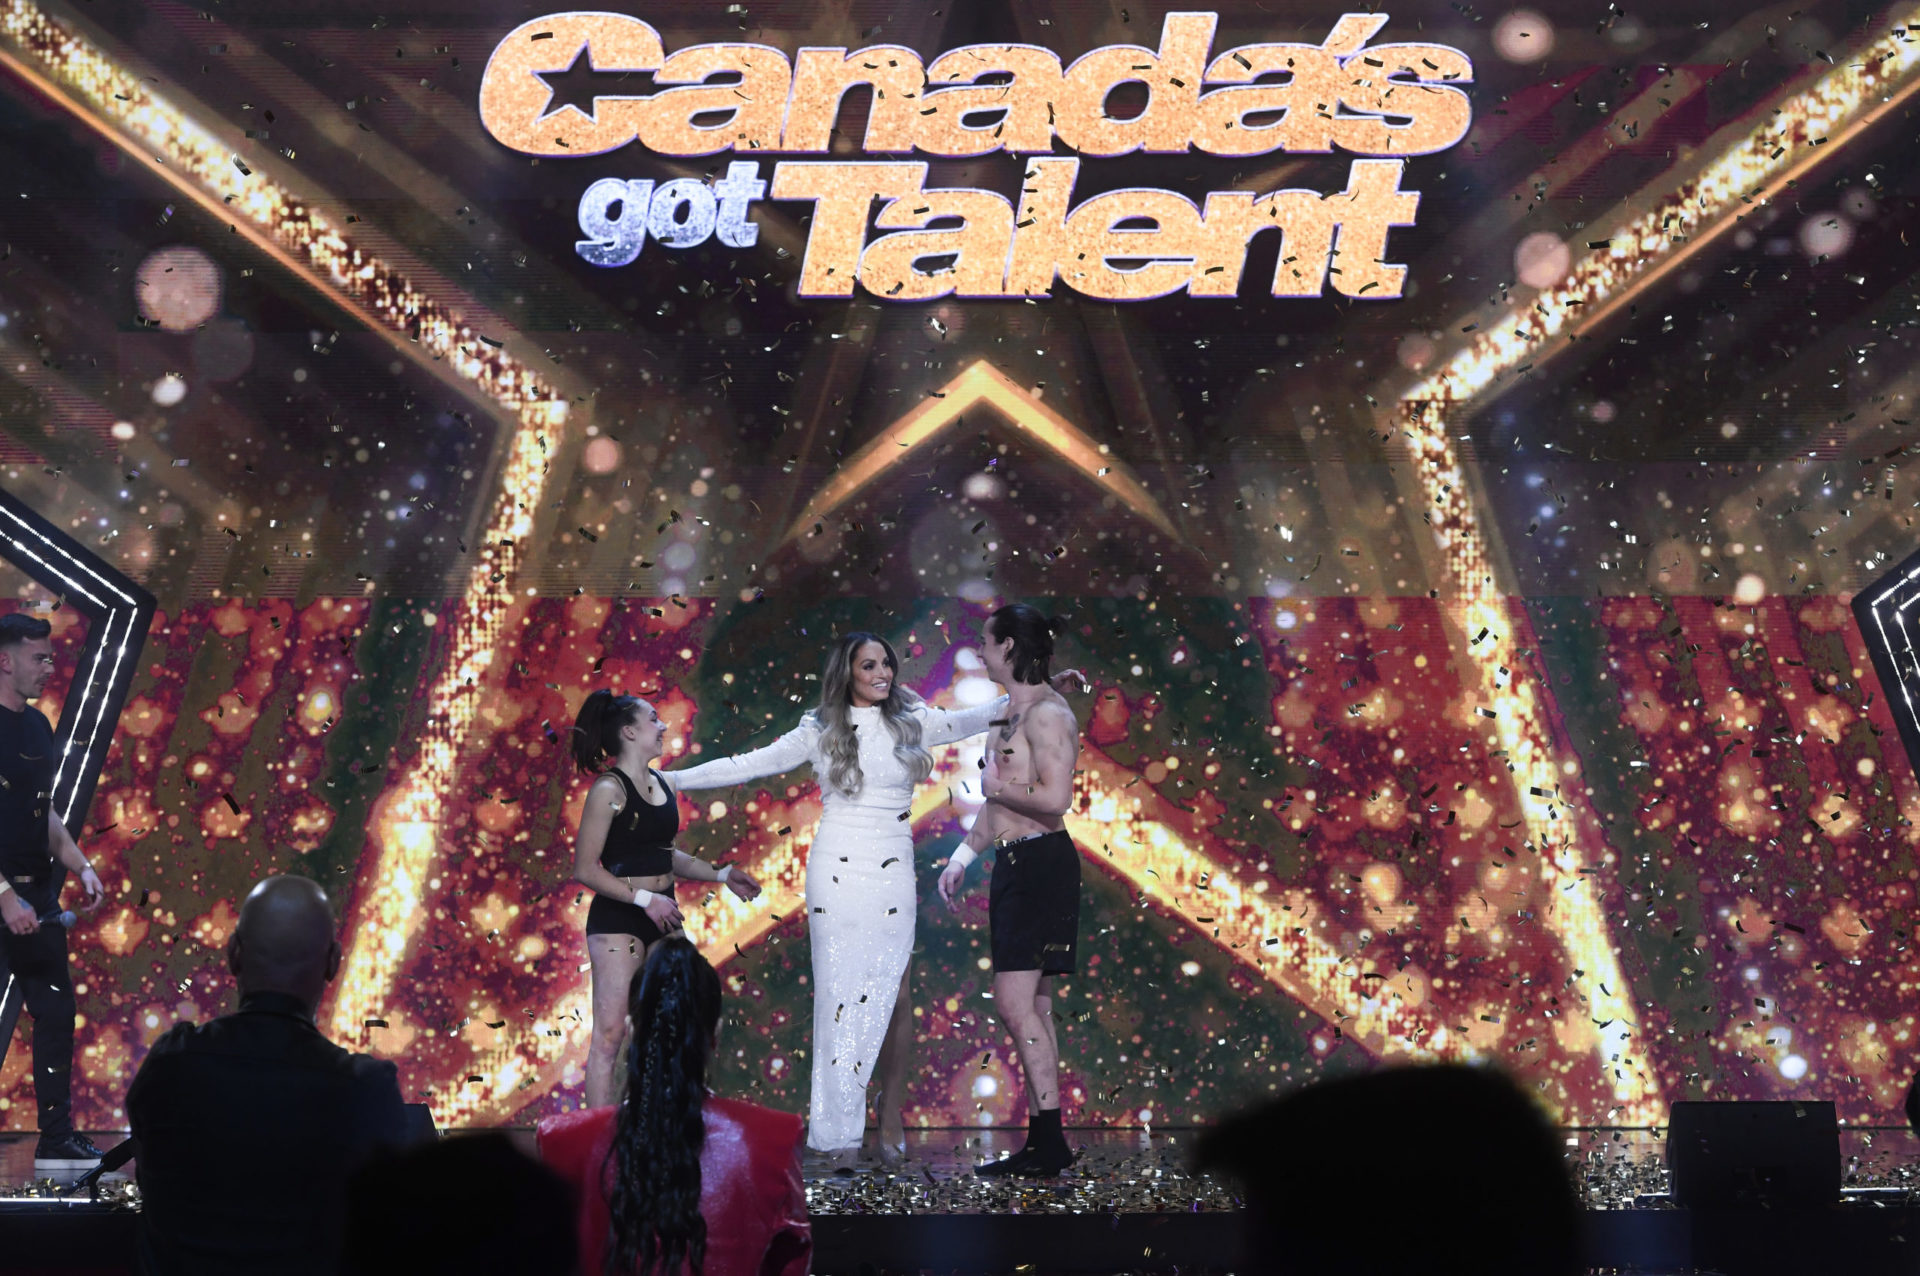 Canada’s Got Talent Contestants soar to new heights for a chance at